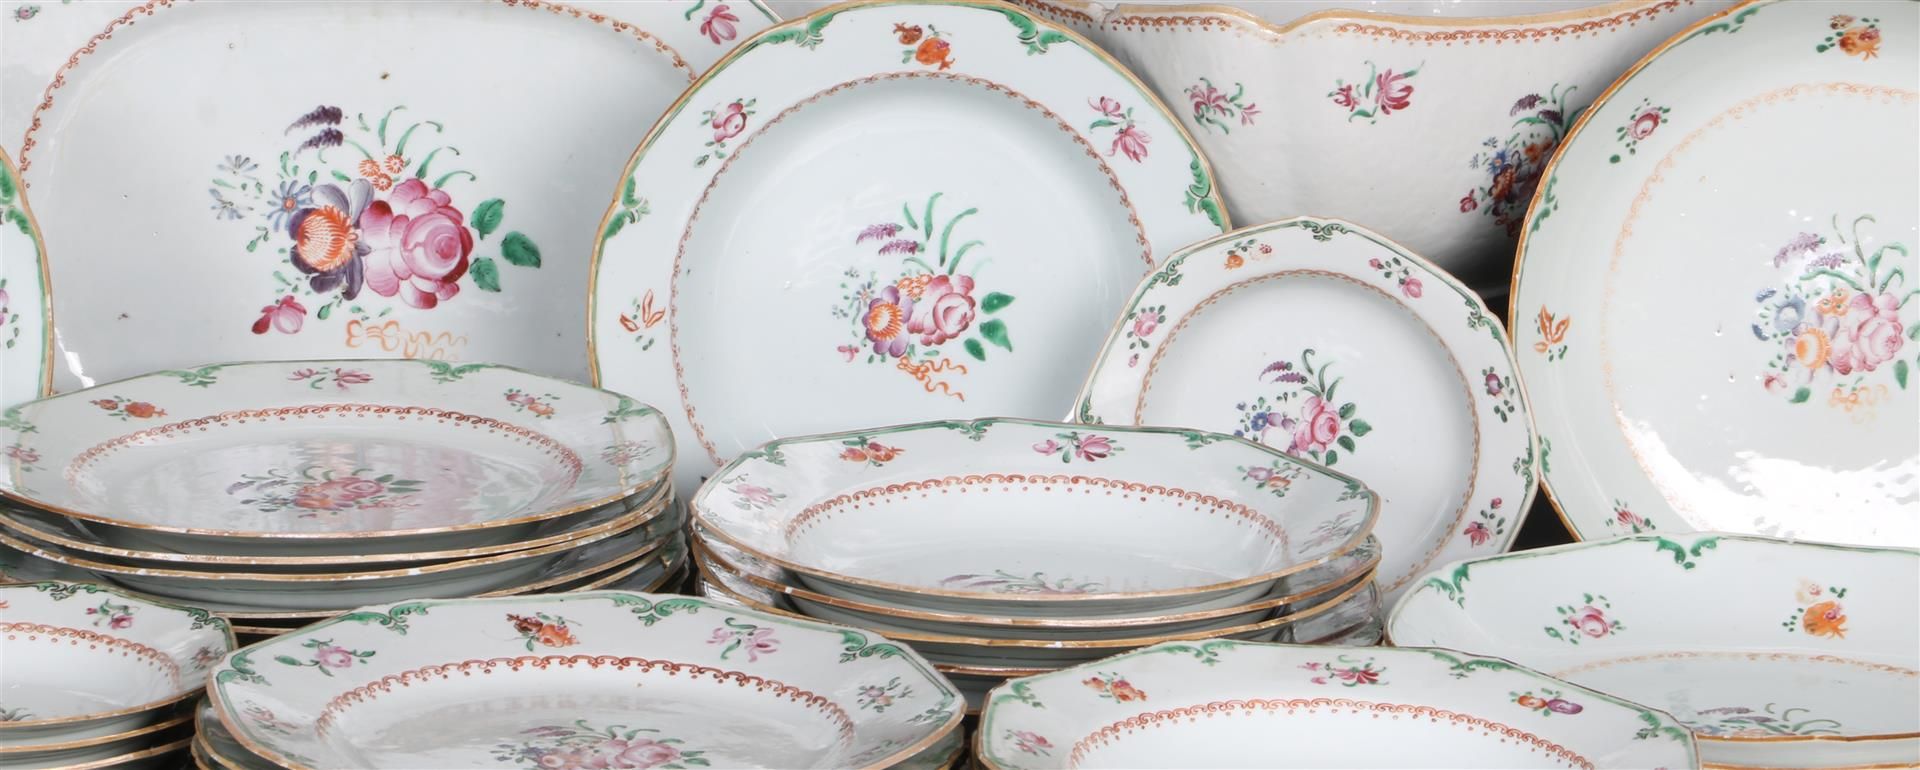 117-piece Chinese porcelain dinner set Famille Rose, Qianlong period - Image 2 of 5